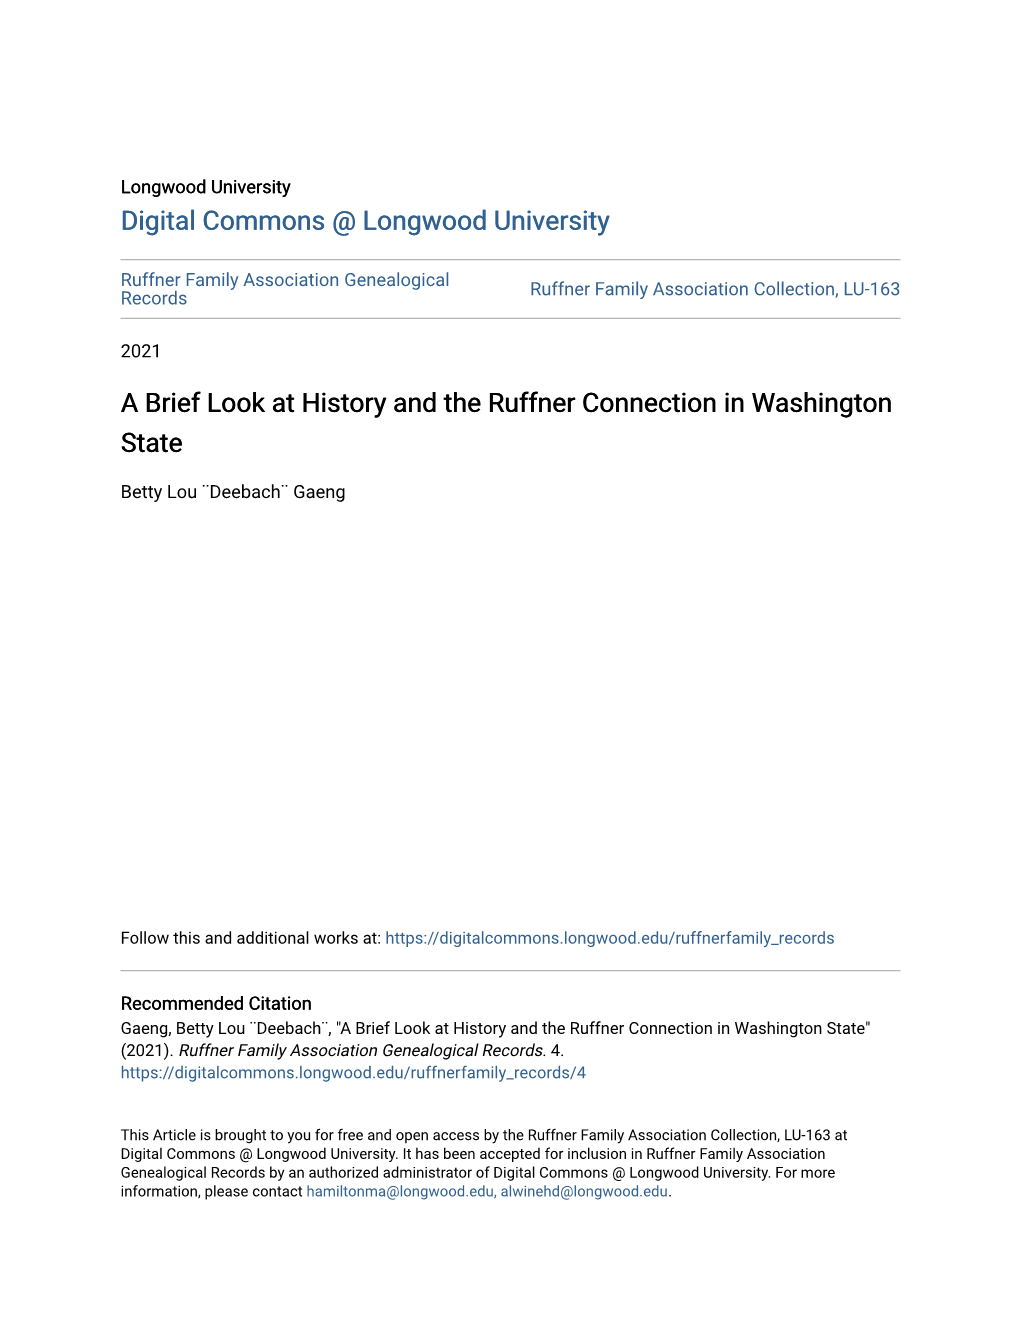 A Brief Look at History and the Ruffner Connection in Washington State